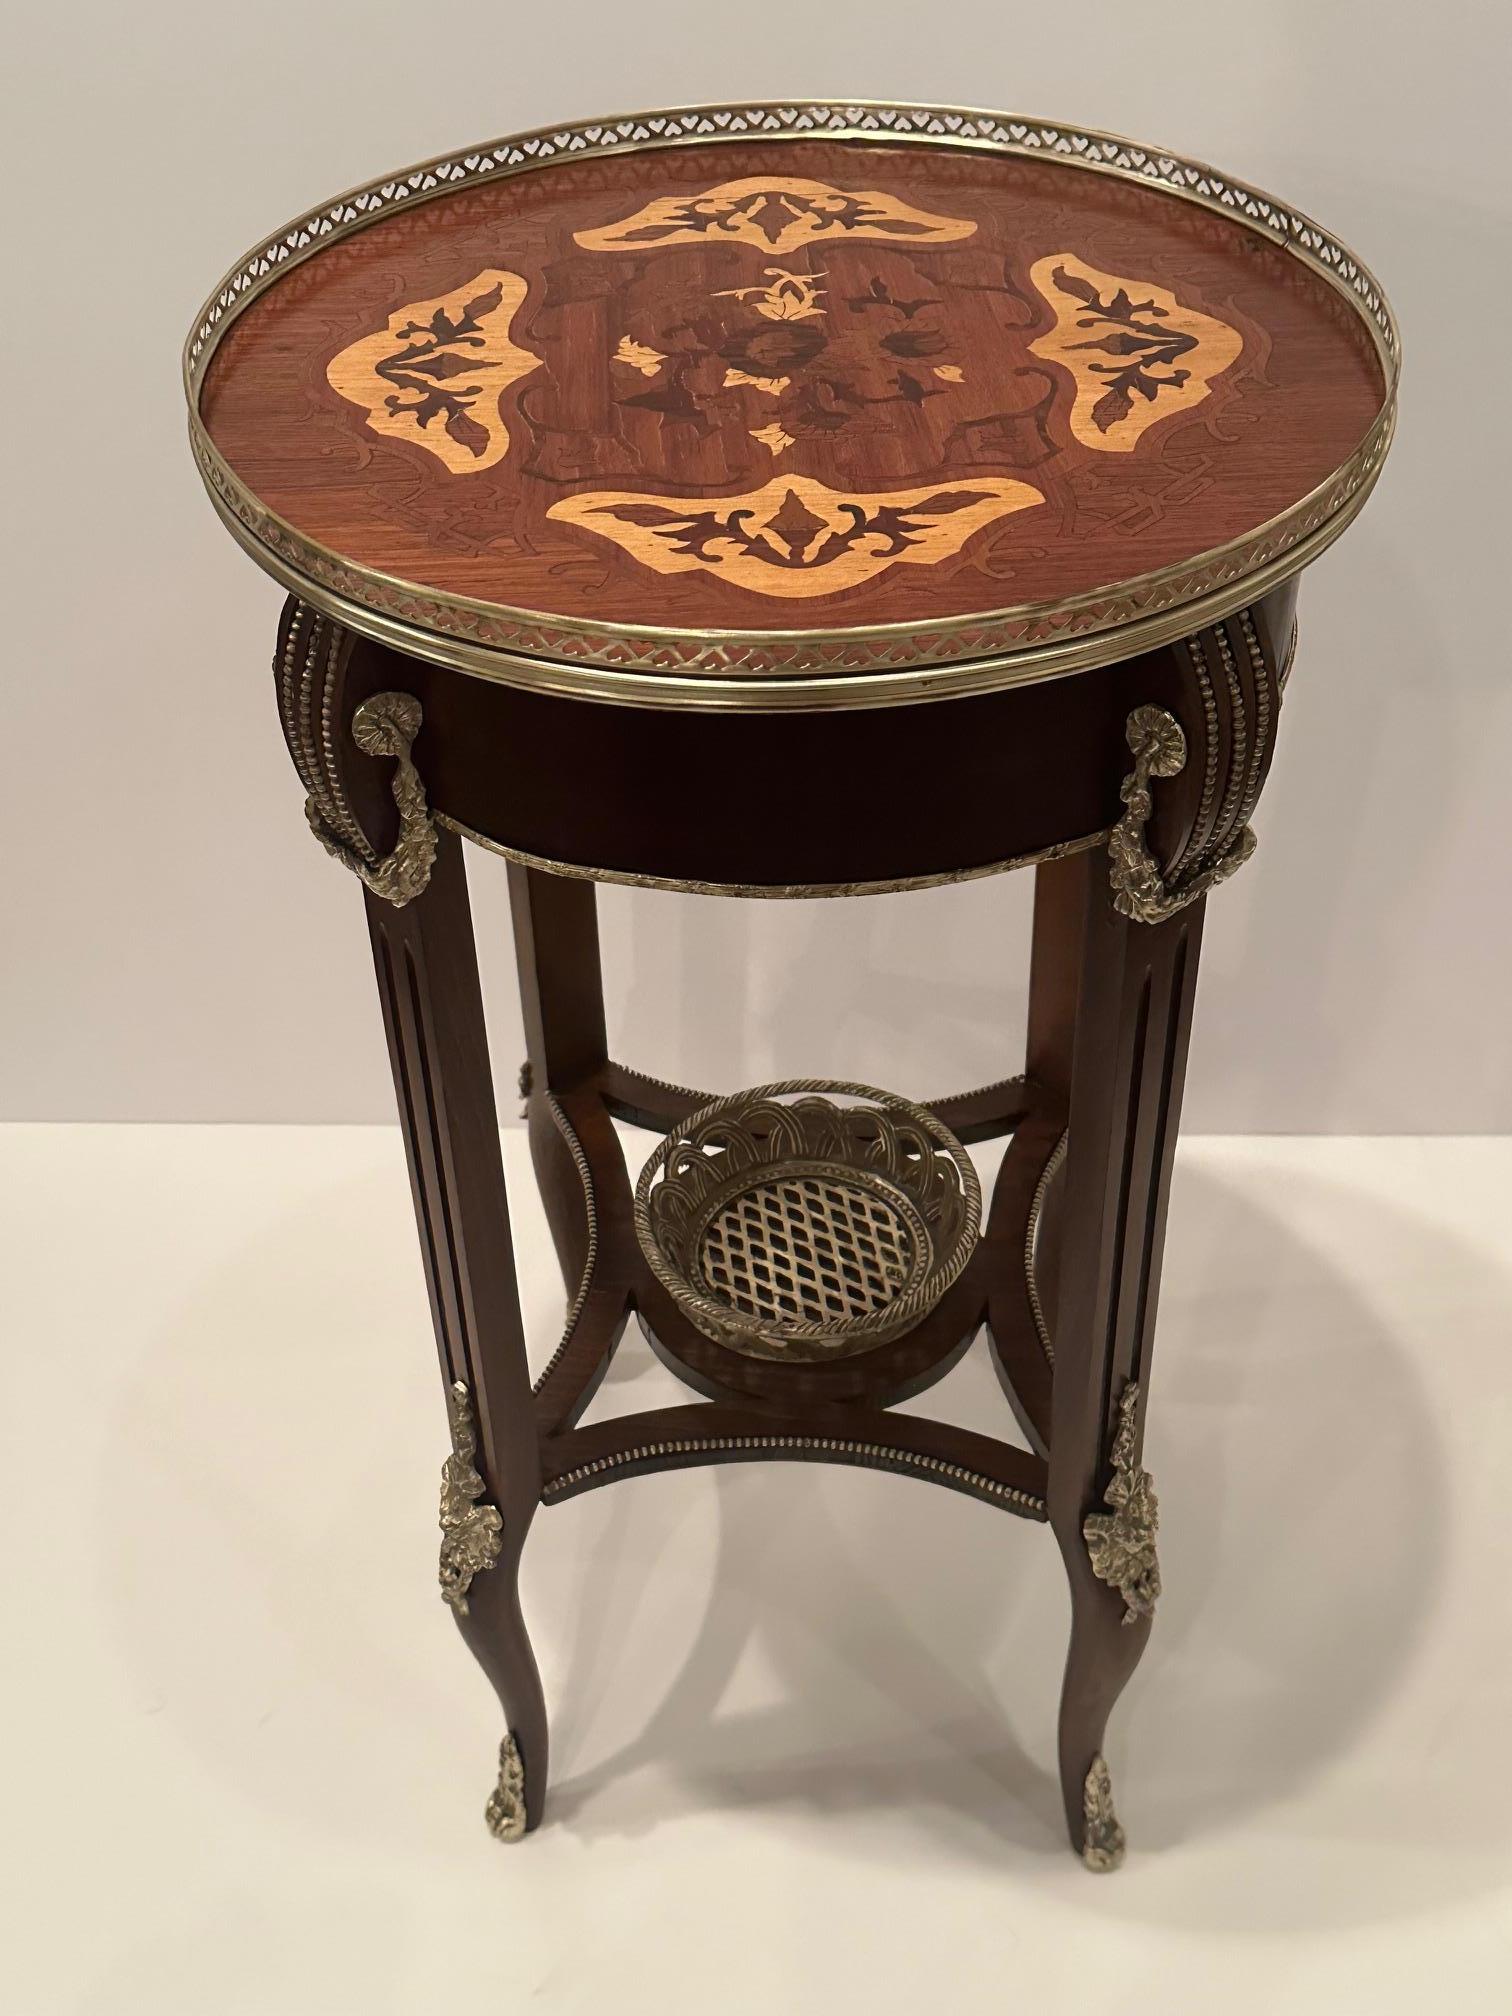 Italian Sumptuous Round Mahogany Inlaid Side Table with Bronze Mounts